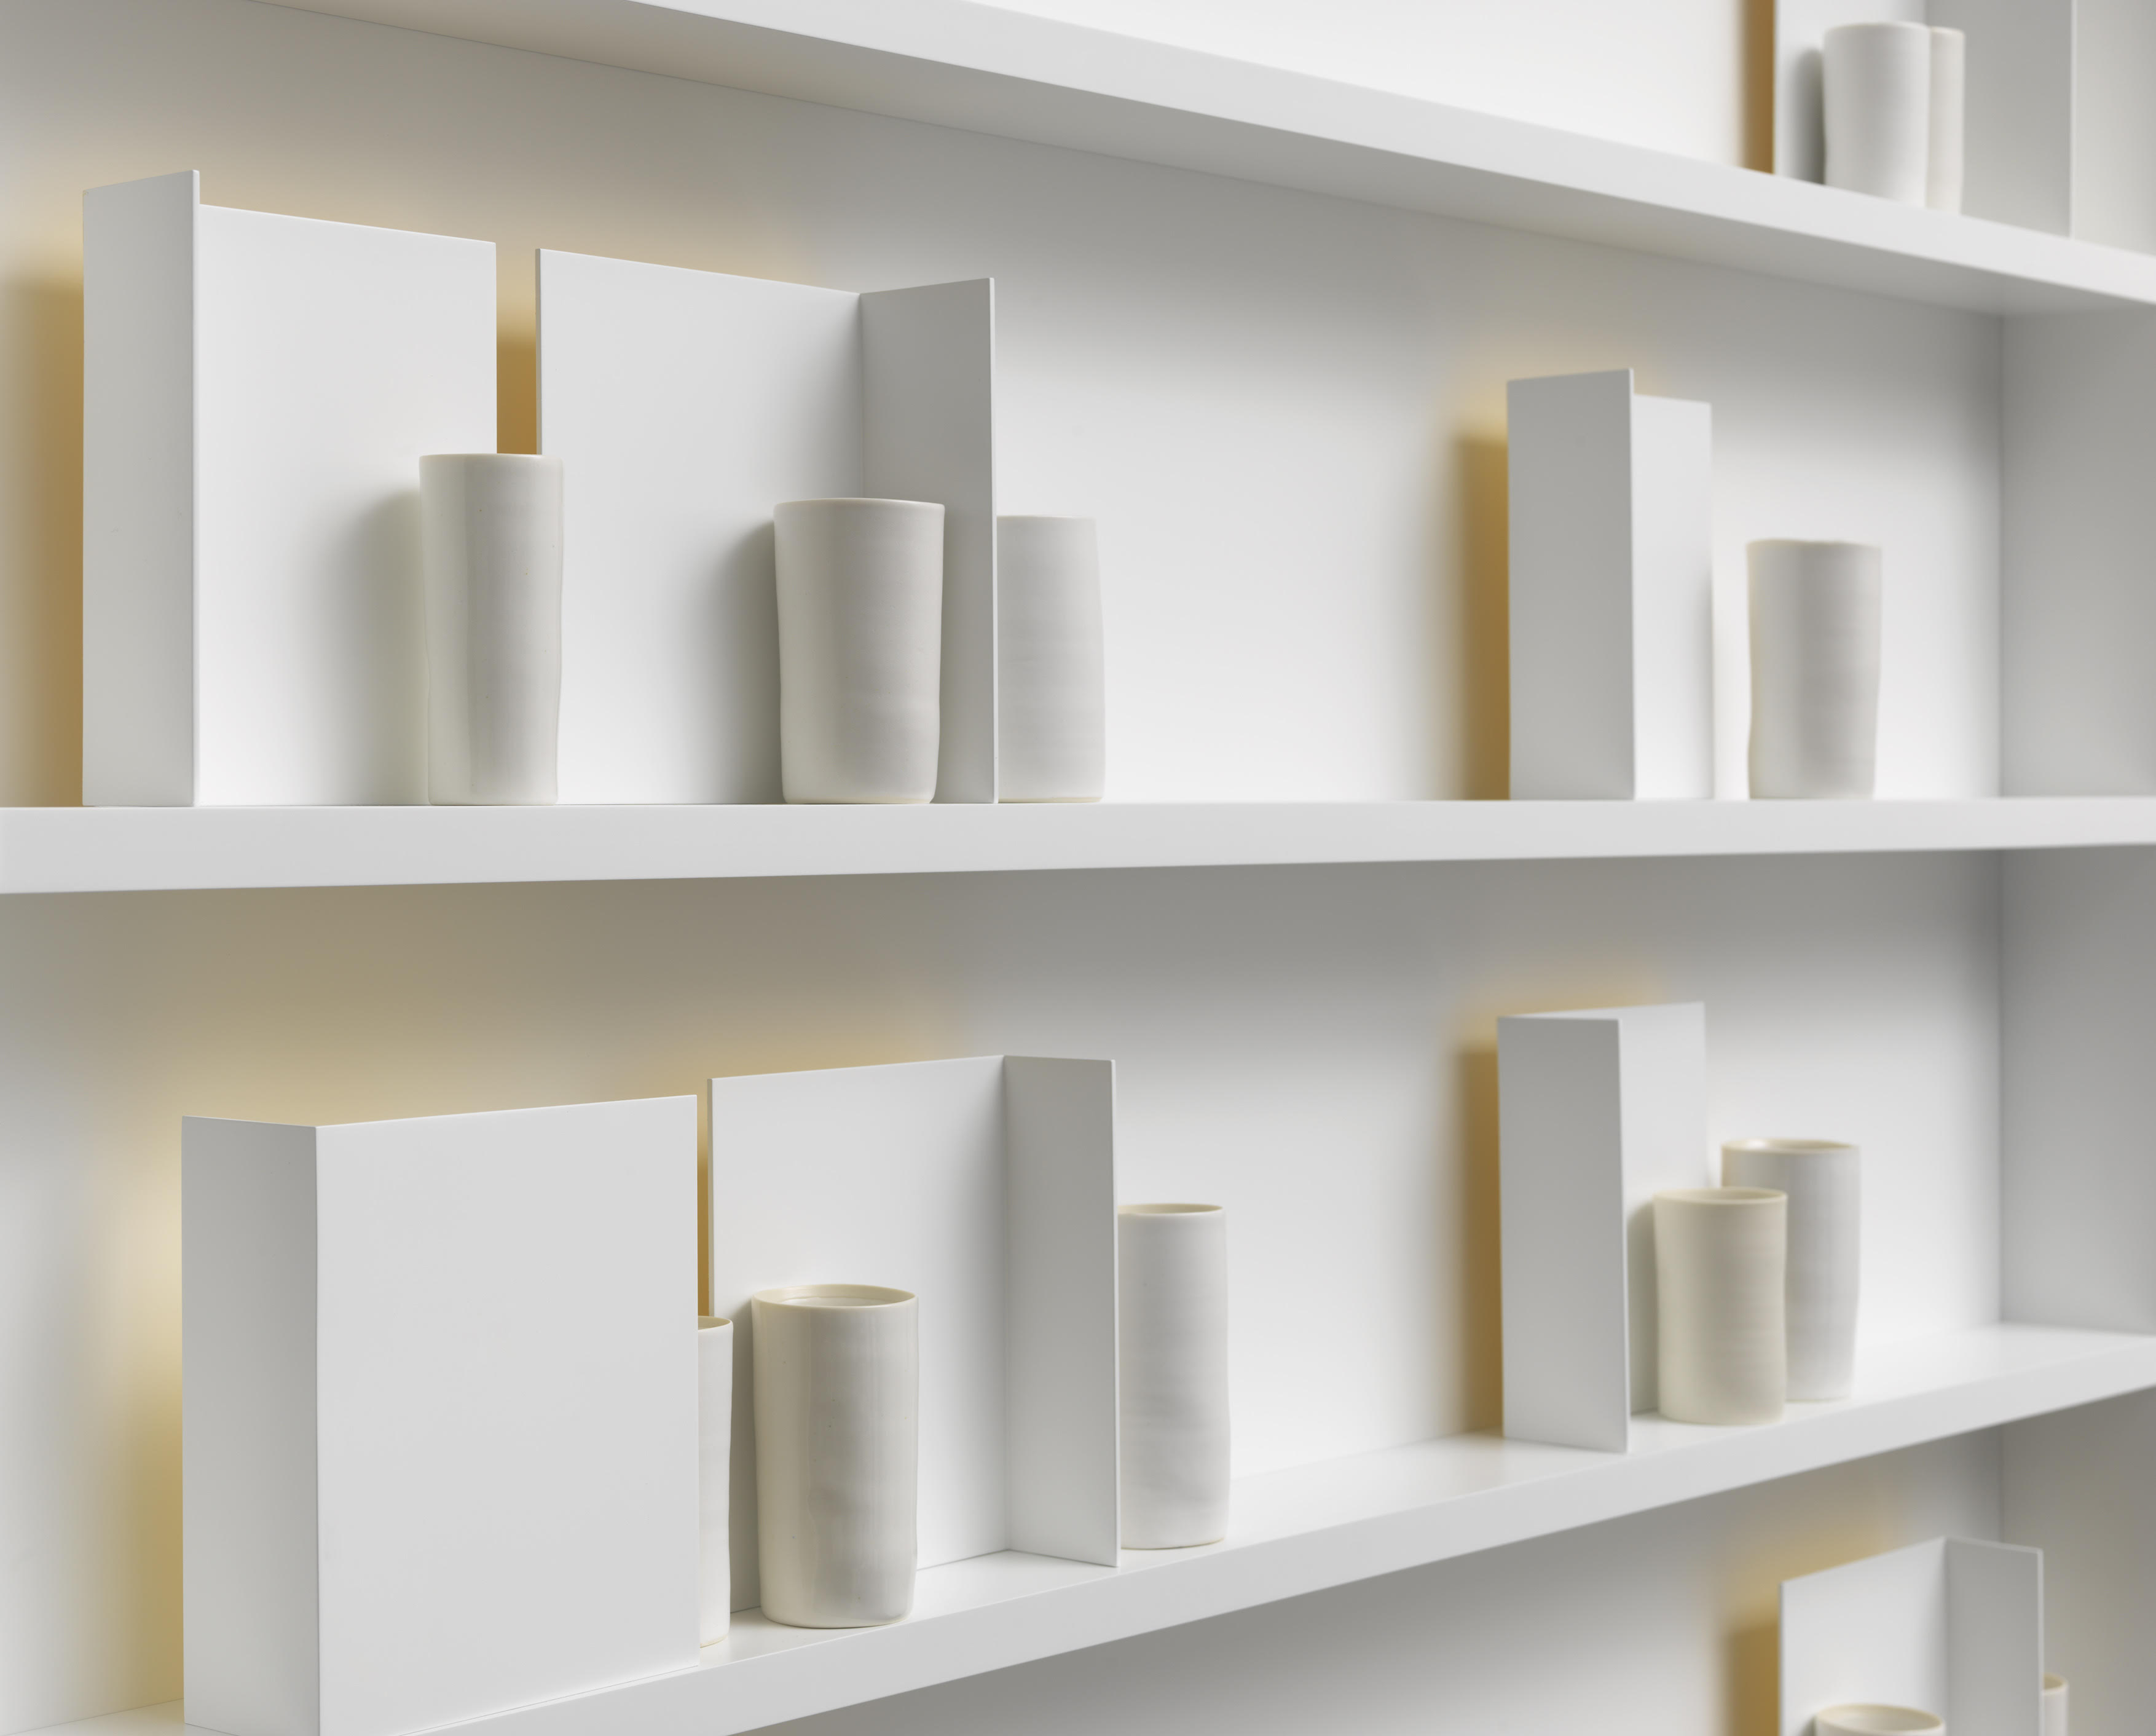 the poems of our climate (detail), 2018 © Edmund de Waal. Courtesy the artist and Gagosian. Photo by Mike Bruce.